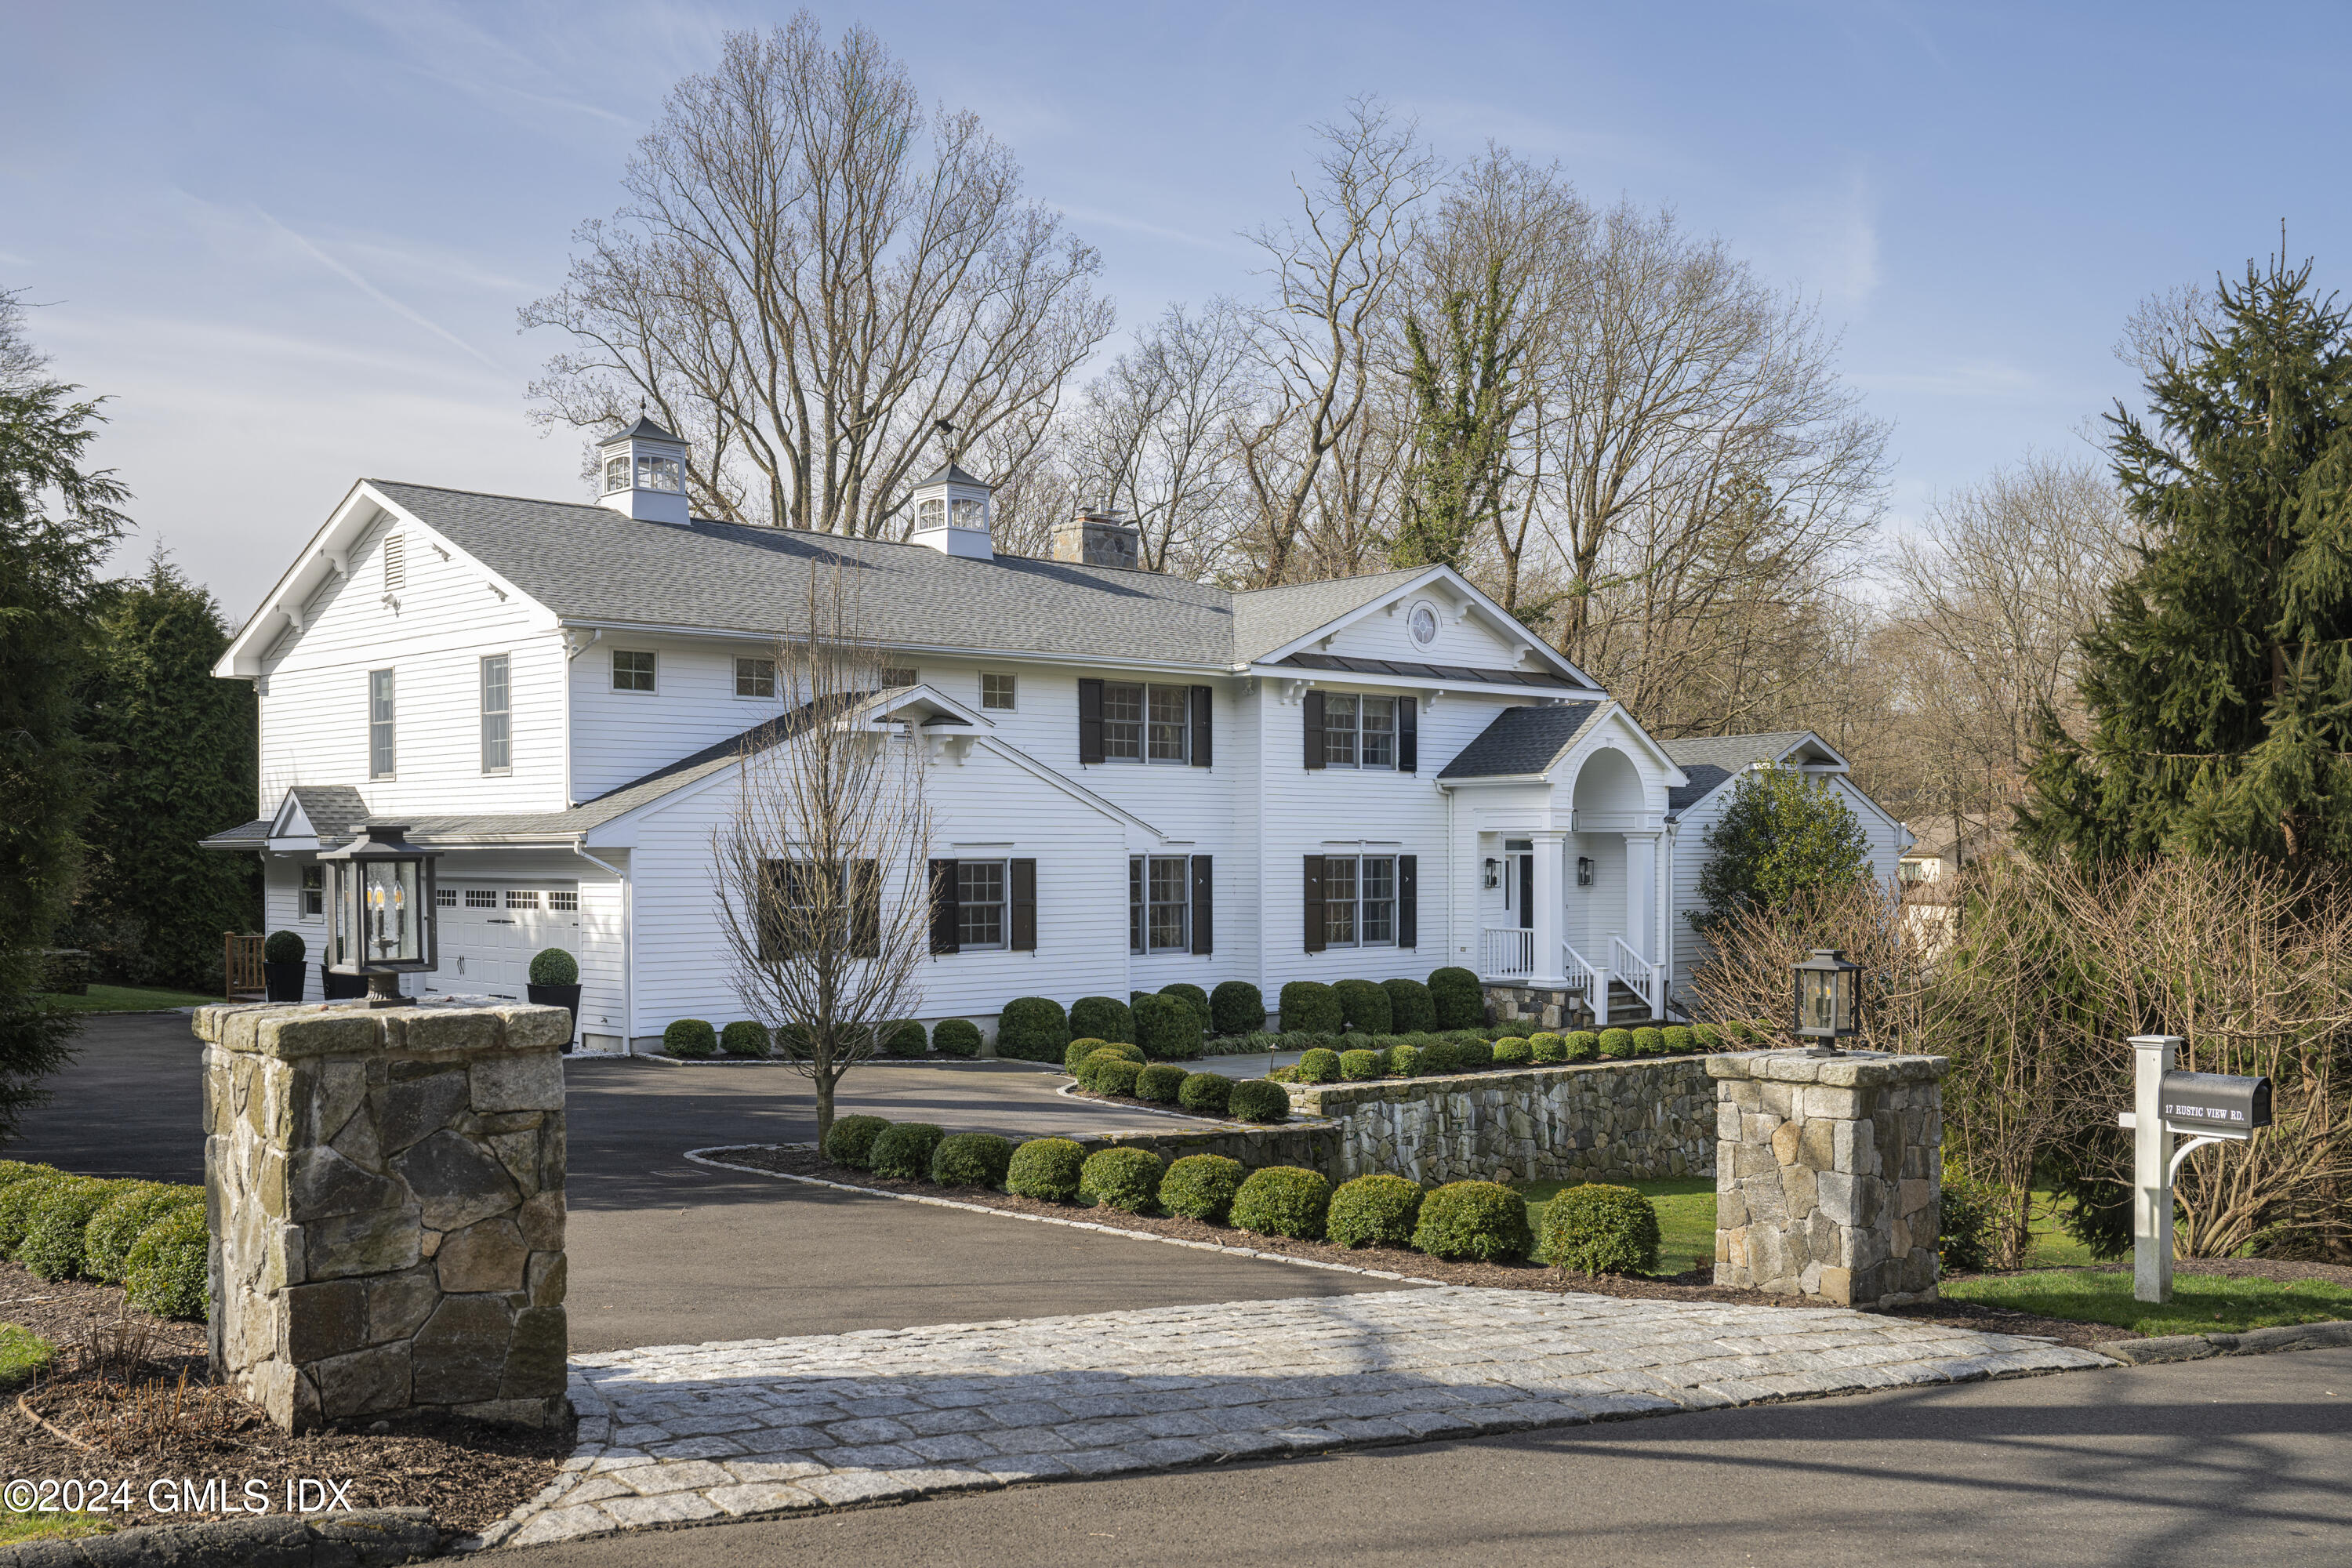 Rental Property at 17 Rustic View Road, Greenwich, Connecticut - Bedrooms: 5 
Bathrooms: 7  - $22,500 MO.